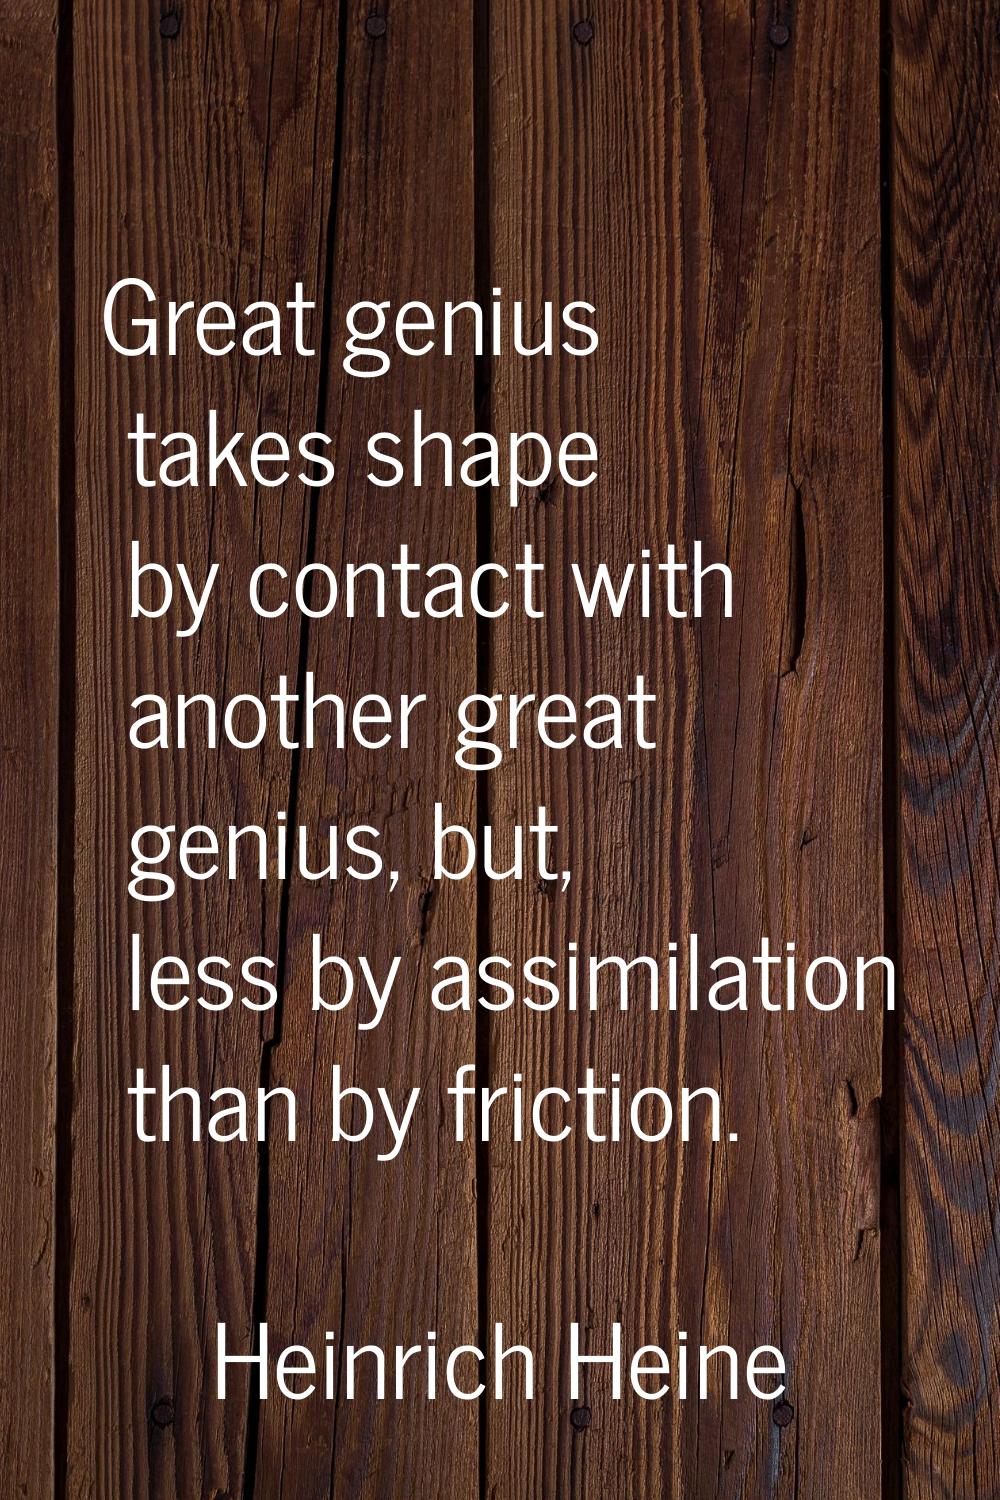 Great genius takes shape by contact with another great genius, but, less by assimilation than by fr